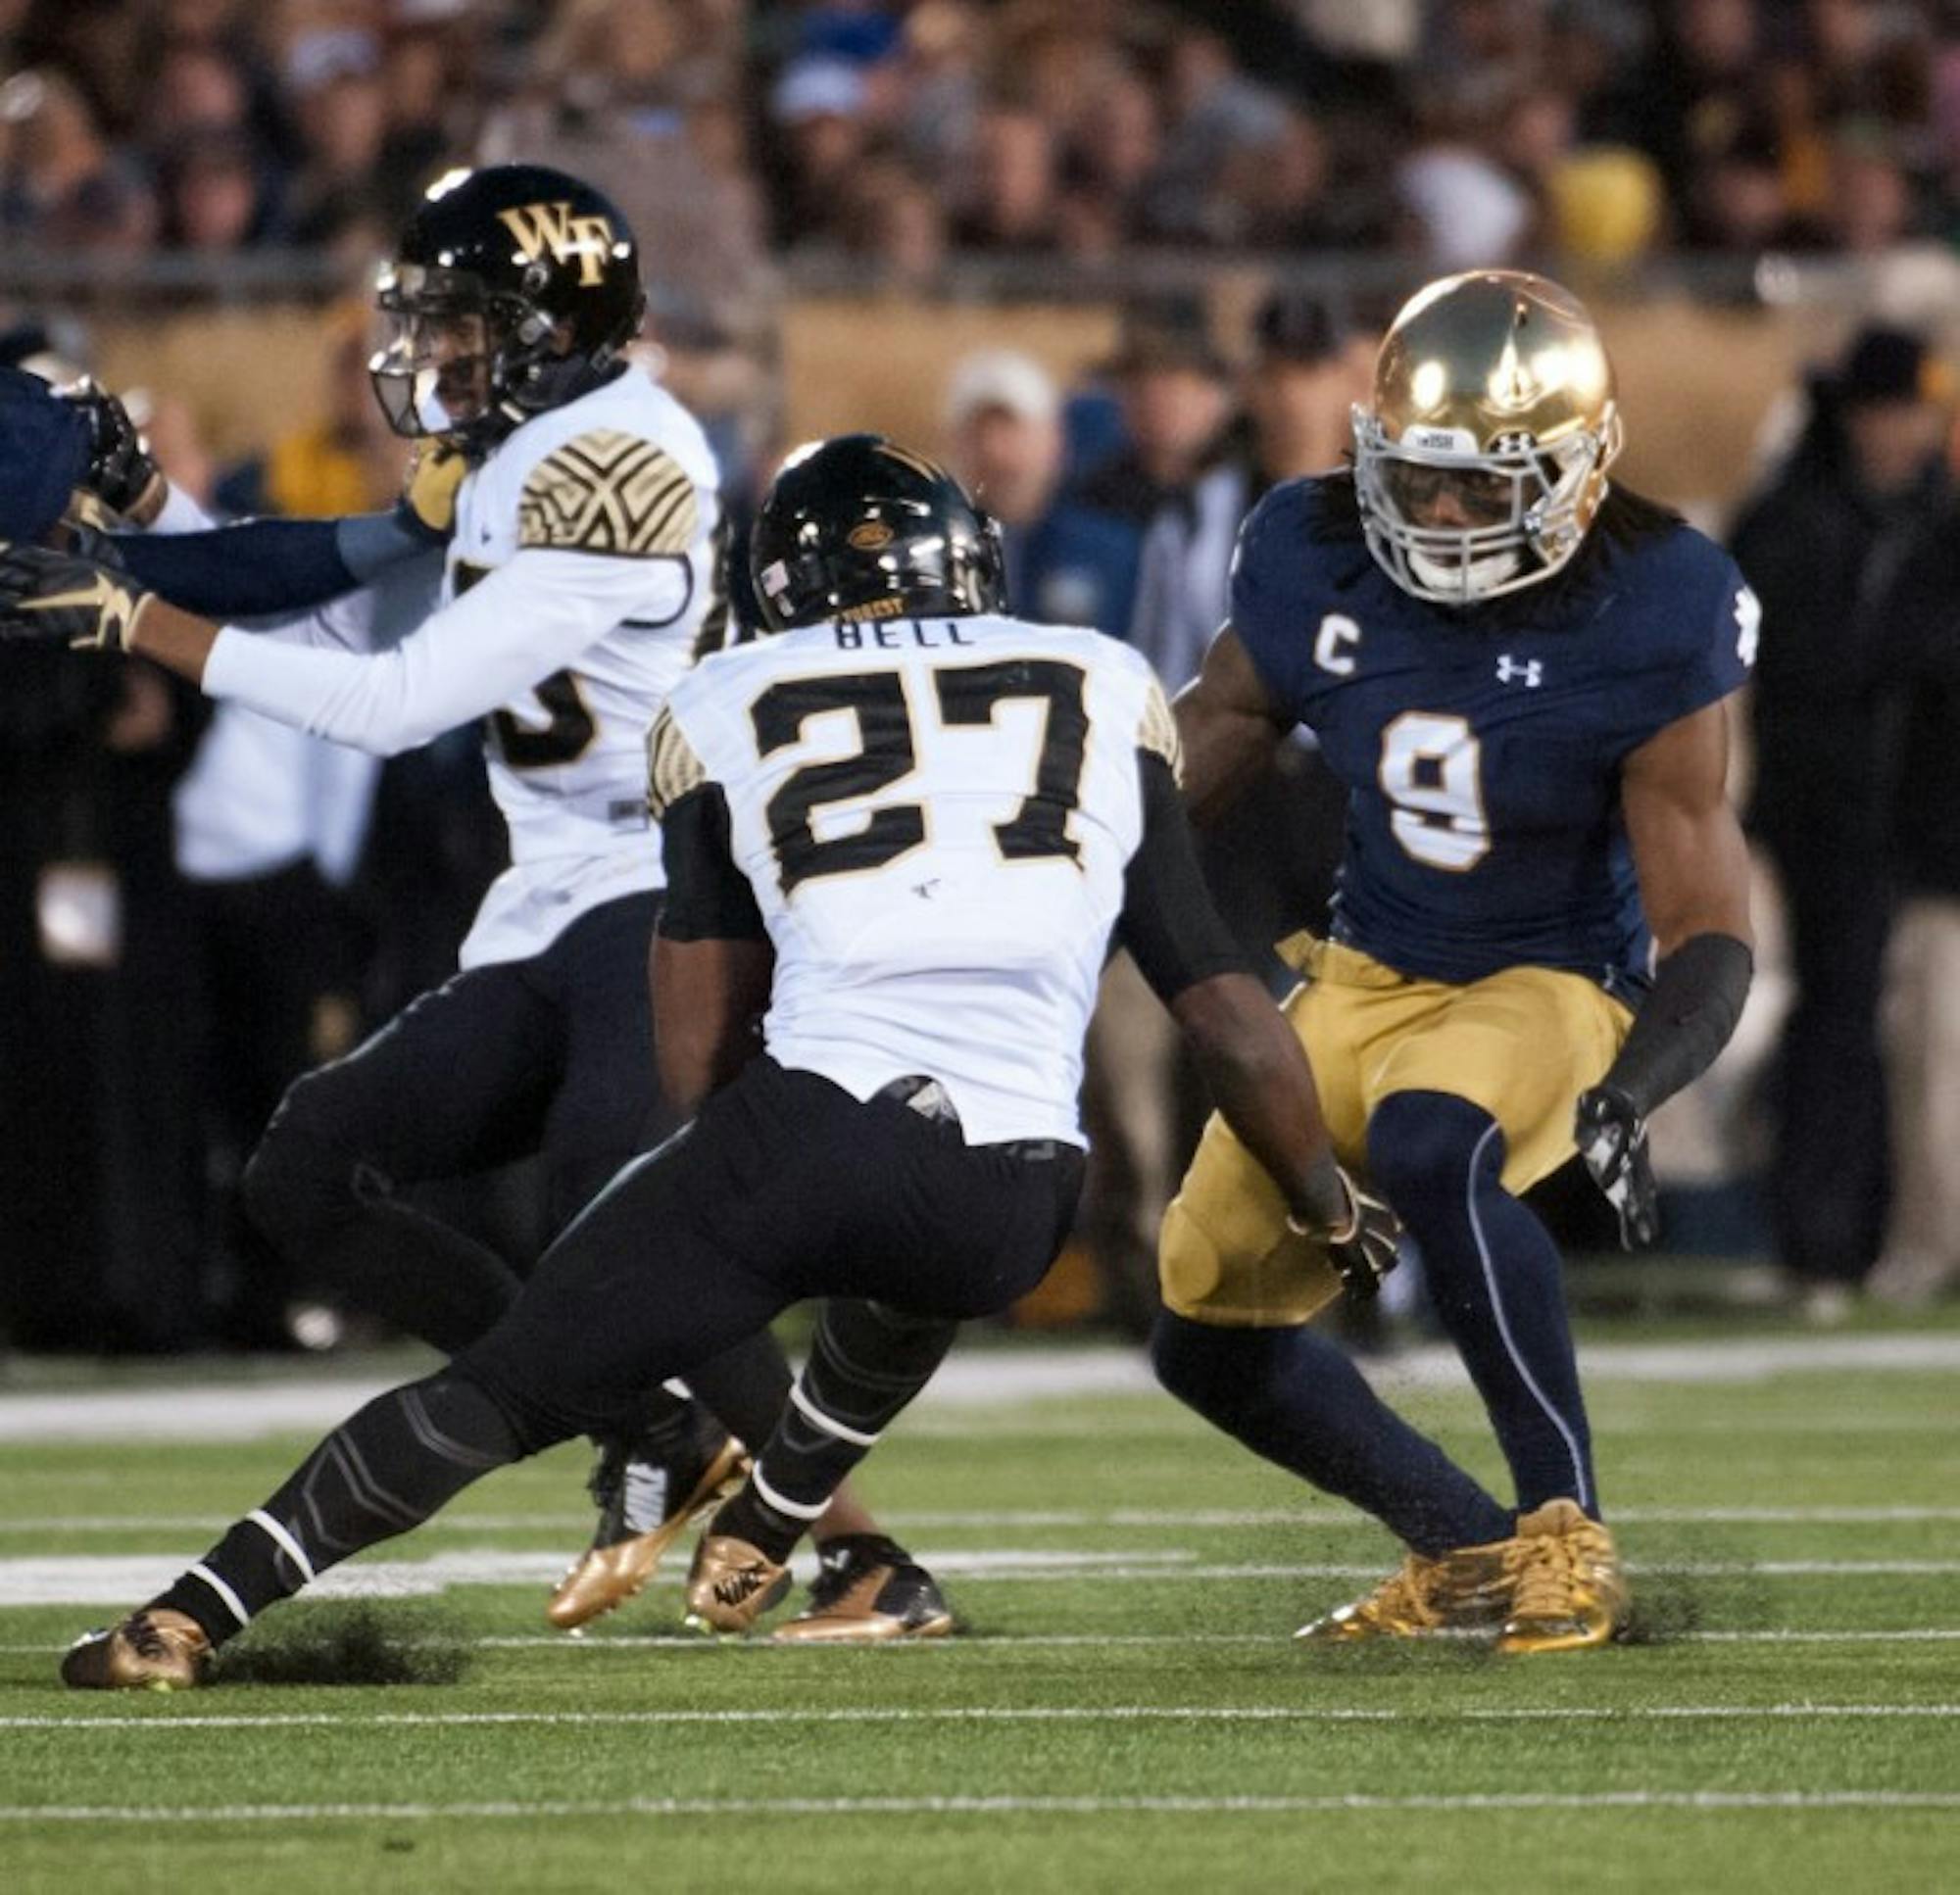 Former Irish linebacker Jaylon Smith attempts to tackle Wake Forest running back during Notre Dame's victory over the Demon Deacons on at Notre Dame Stadium.